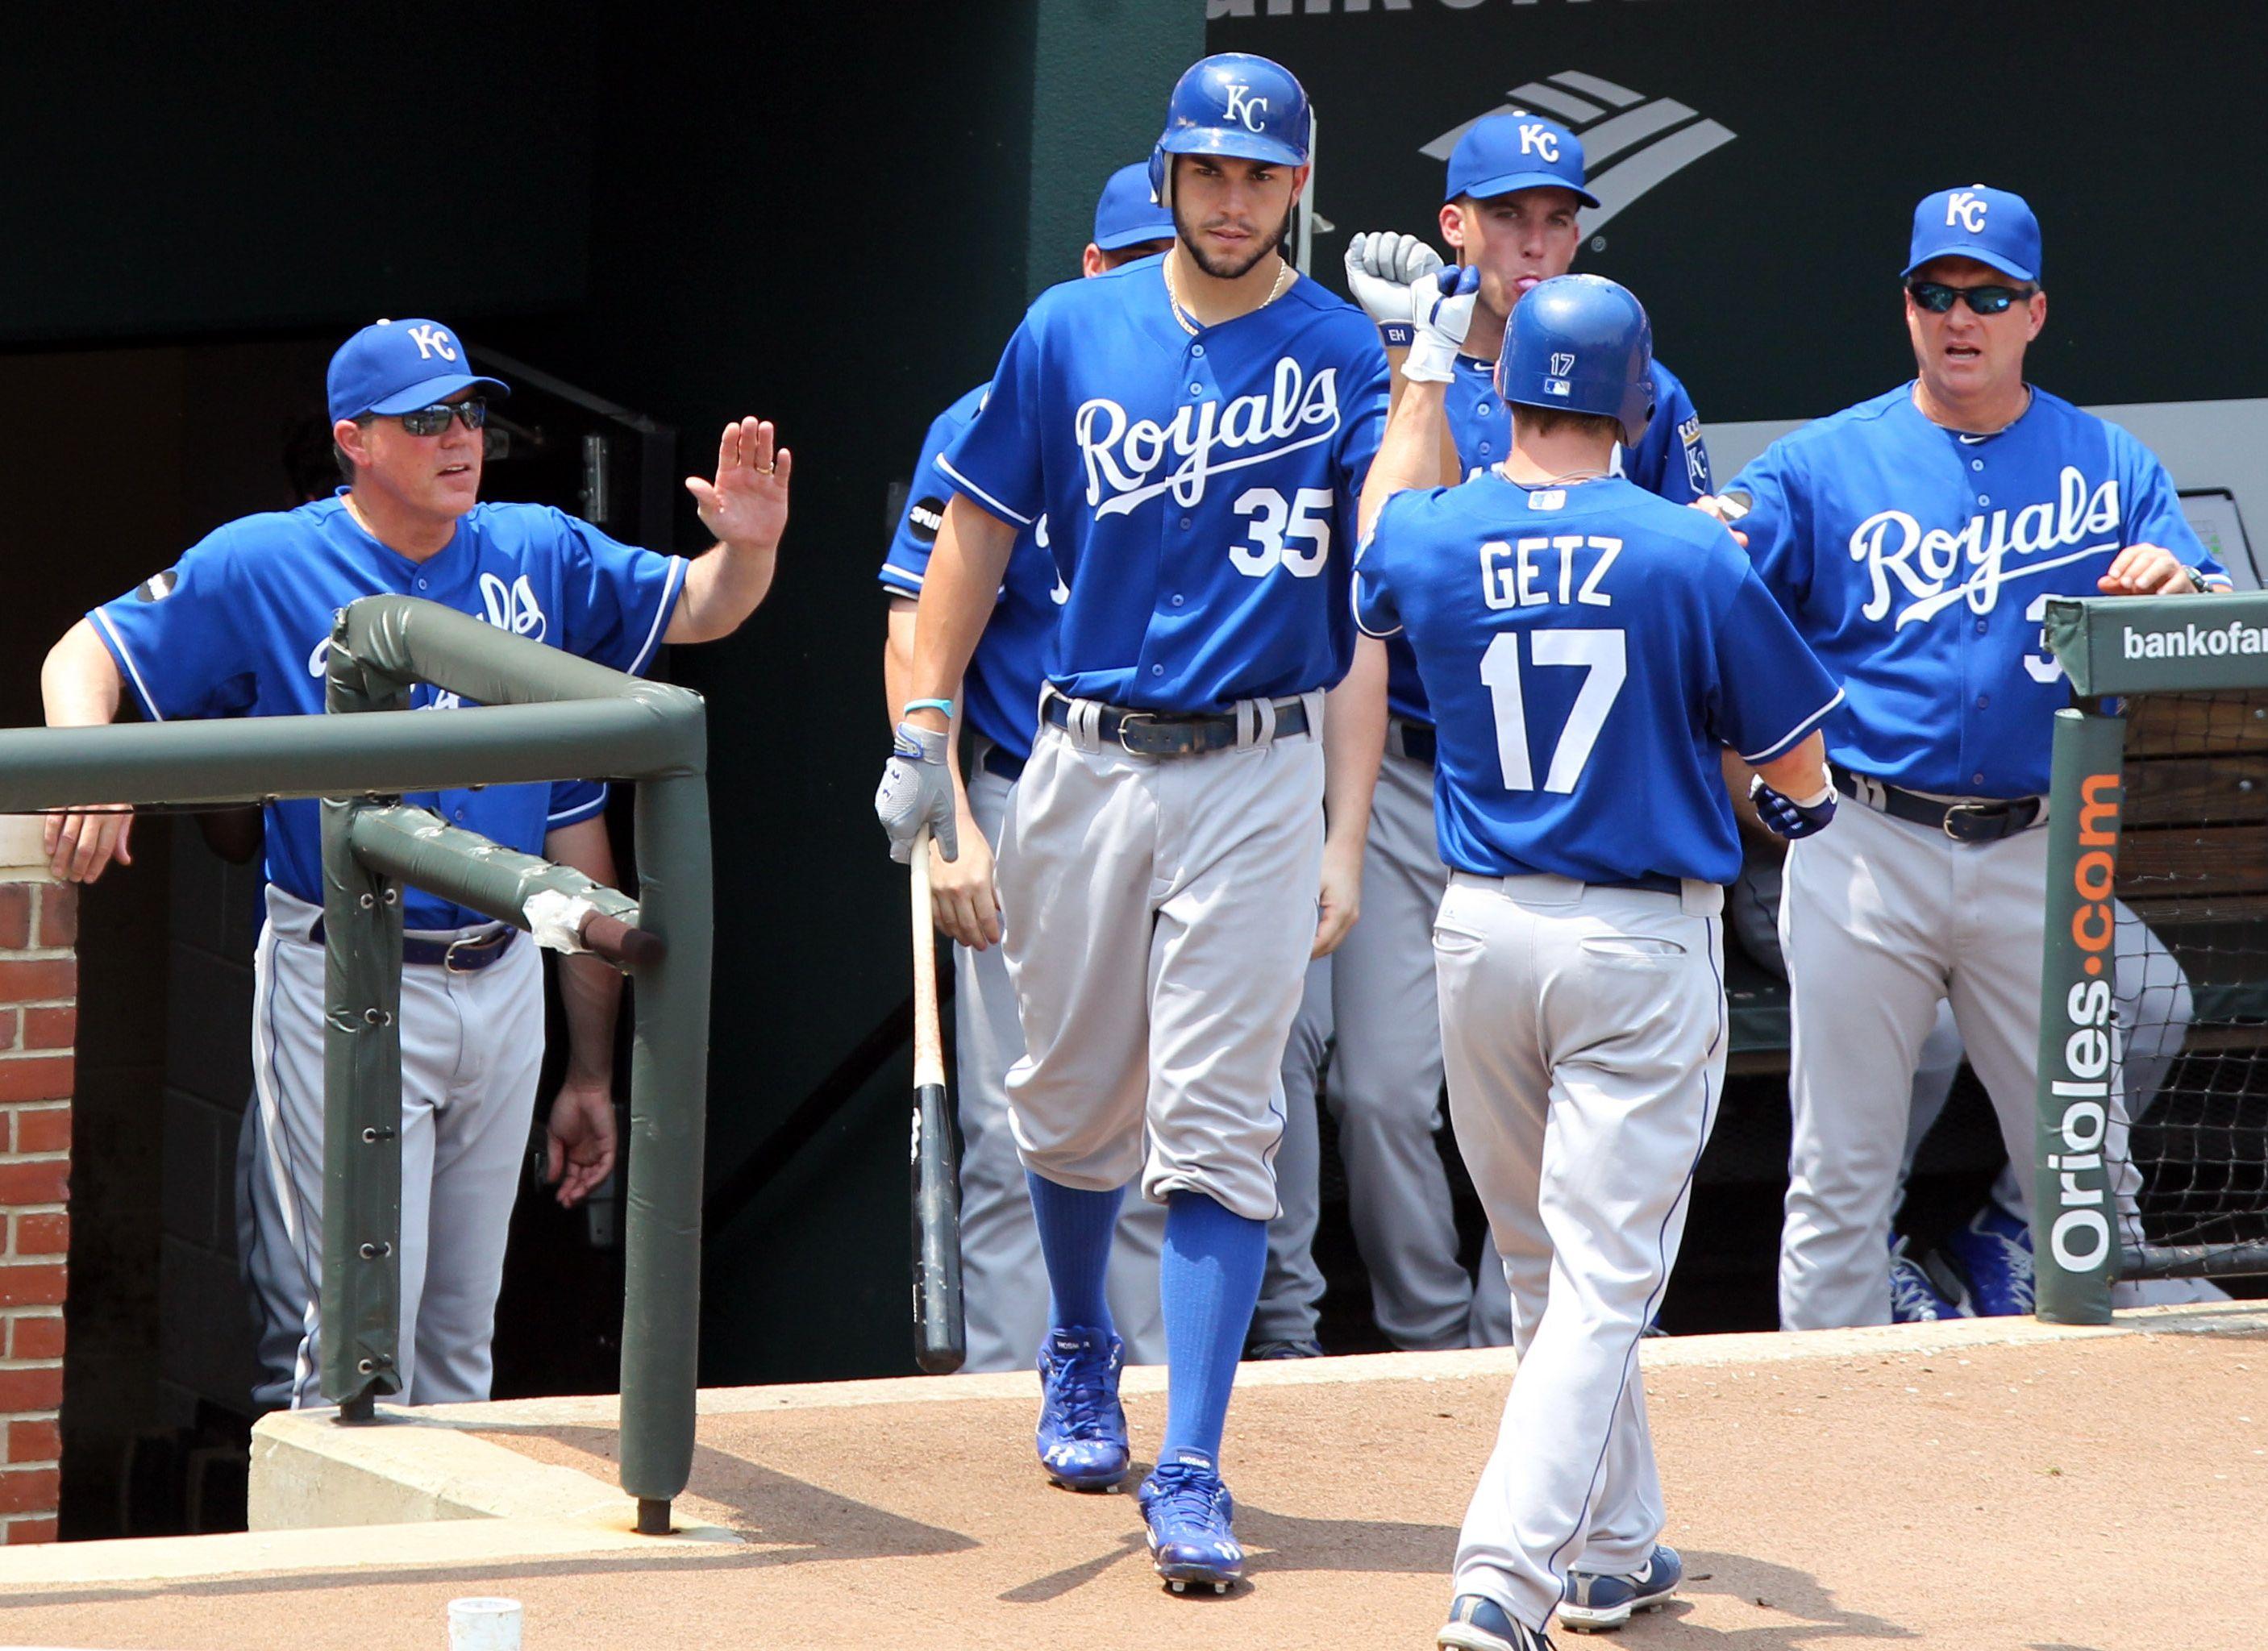 Kansas City Royals: Stop lying about abortion